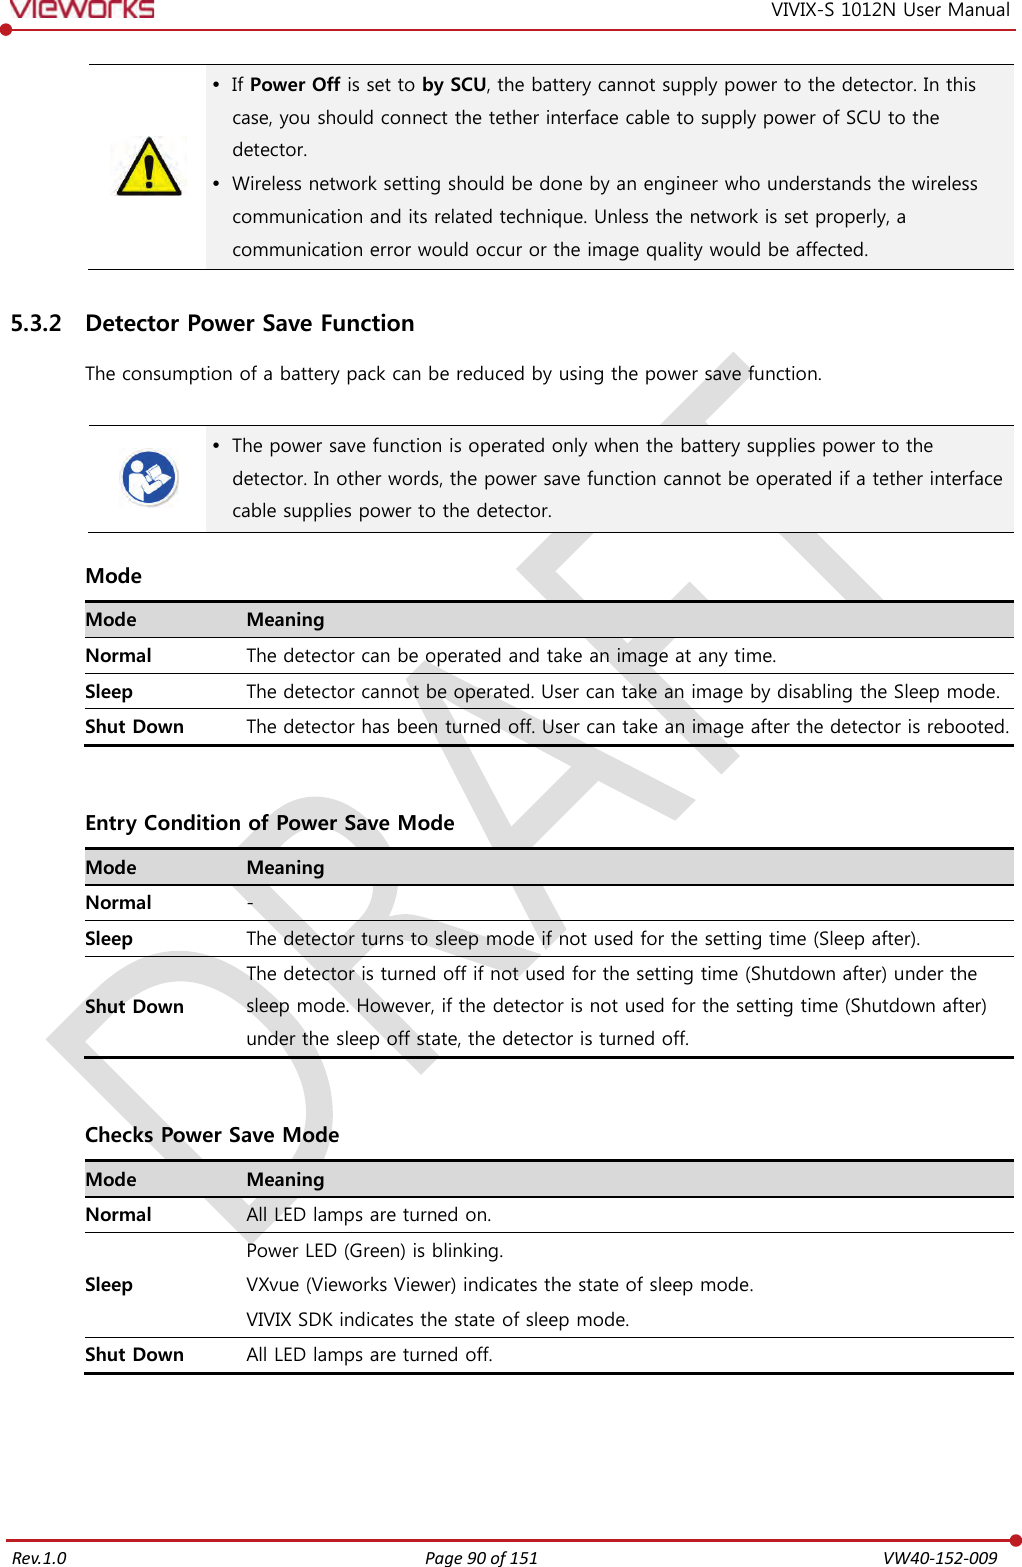   Rev.1.0 Page 90 of 151  VW40-152-009 VIVIX-S 1012N User Manual   If Power Off is set to by SCU, the battery cannot supply power to the detector. In this case, you should connect the tether interface cable to supply power of SCU to the detector.  Wireless network setting should be done by an engineer who understands the wireless communication and its related technique. Unless the network is set properly, a communication error would occur or the image quality would be affected. 5.3.2 Detector Power Save Function The consumption of a battery pack can be reduced by using the power save function.    The power save function is operated only when the battery supplies power to the detector. In other words, the power save function cannot be operated if a tether interface cable supplies power to the detector.  Mode Mode Meaning Normal The detector can be operated and take an image at any time. Sleep The detector cannot be operated. User can take an image by disabling the Sleep mode. Shut Down The detector has been turned off. User can take an image after the detector is rebooted.   Entry Condition of Power Save Mode Mode Meaning Normal - Sleep The detector turns to sleep mode if not used for the setting time (Sleep after). Shut Down The detector is turned off if not used for the setting time (Shutdown after) under the sleep mode. However, if the detector is not used for the setting time (Shutdown after) under the sleep off state, the detector is turned off.   Checks Power Save Mode Mode Meaning Normal All LED lamps are turned on. Sleep Power LED (Green) is blinking. VXvue (Vieworks Viewer) indicates the state of sleep mode. VIVIX SDK indicates the state of sleep mode. Shut Down All LED lamps are turned off.     